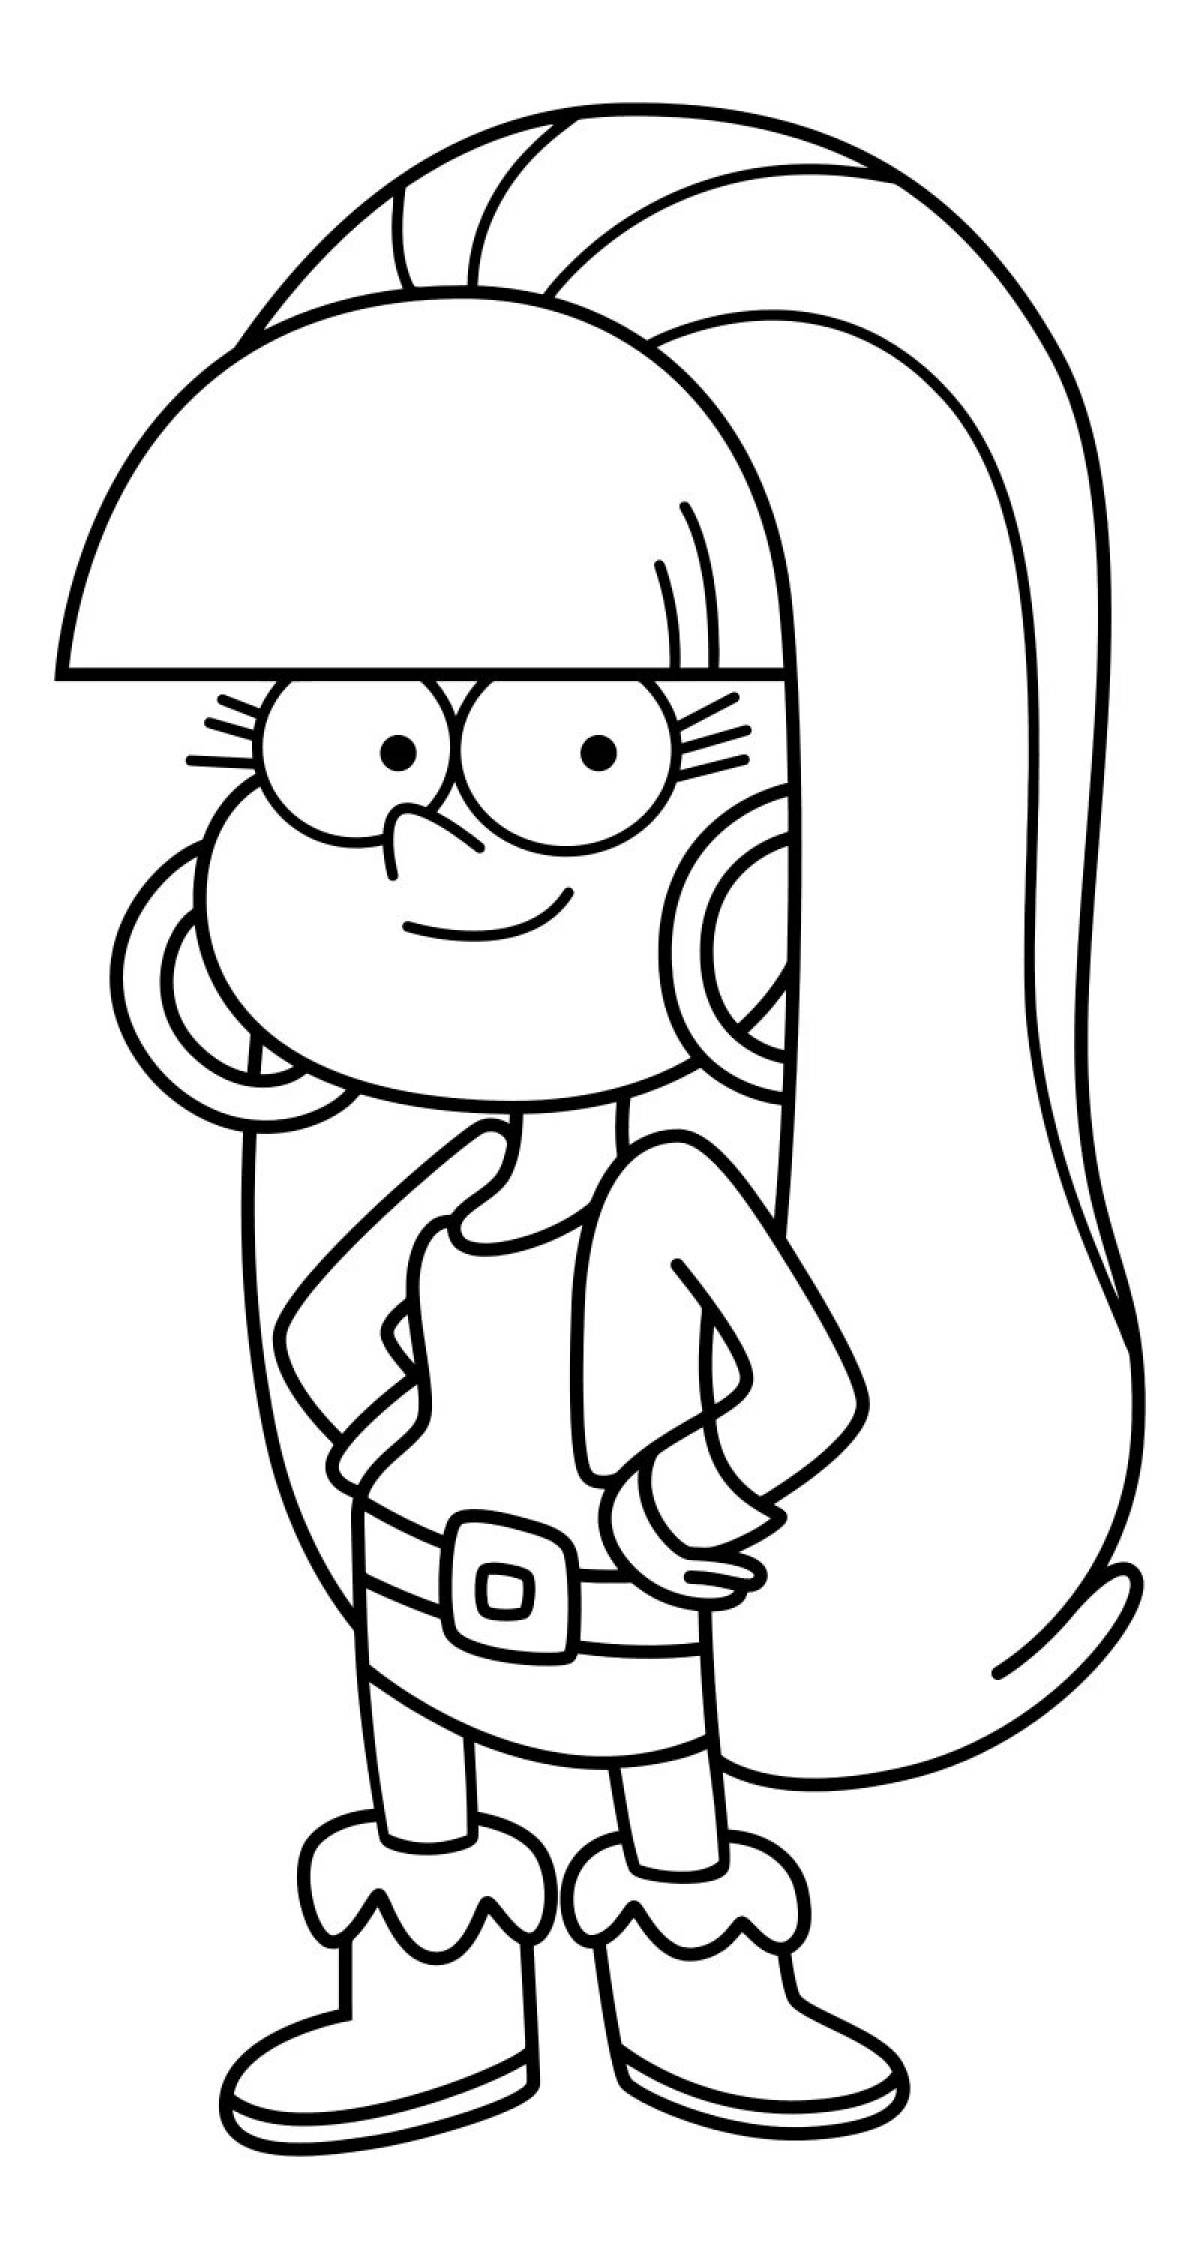 Attractive coloring pages for gravity falls